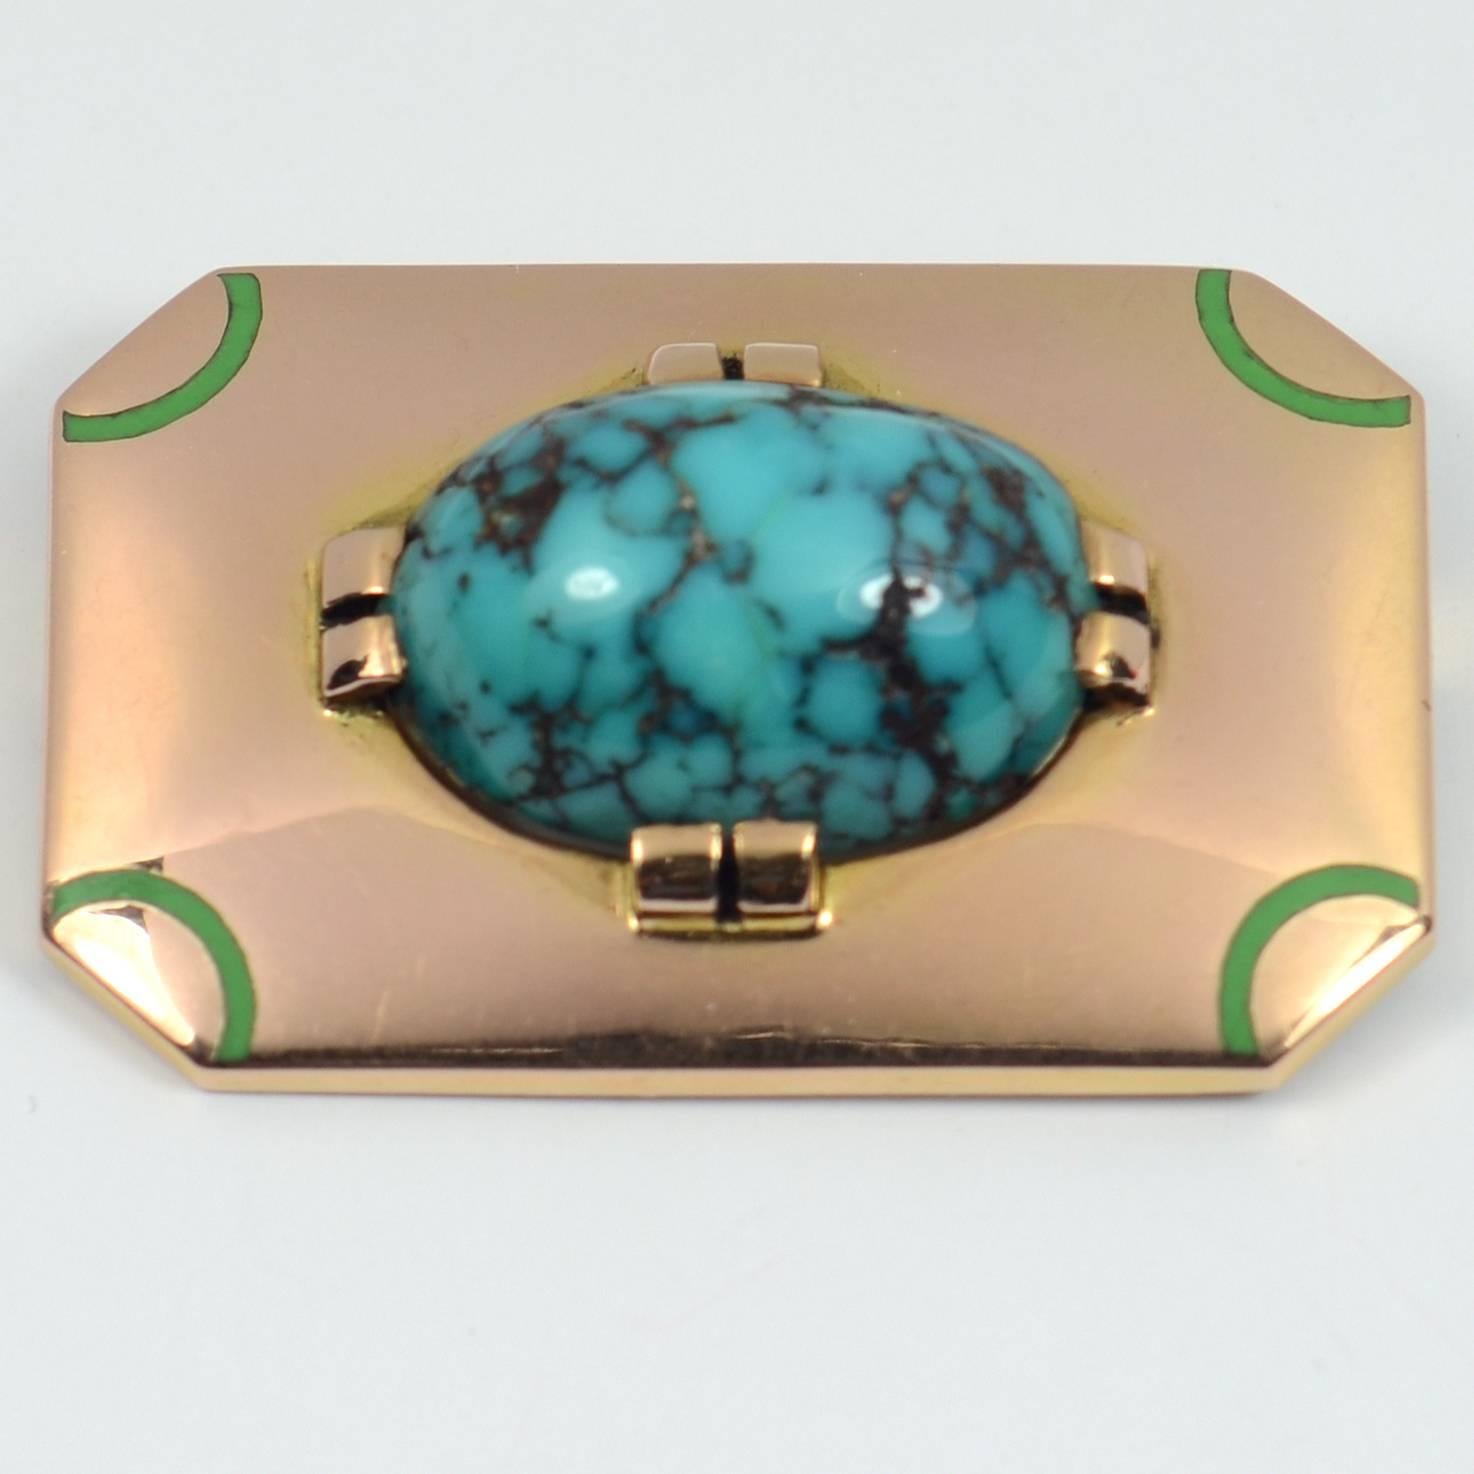 A very smart Art Deco brooch designed as a rectangular plaque of gold with truncated corners giving an octagonal outline, highlighted to the corners with arcs of green enamel and set with a large cabochon of turquoise.

The turquoise cabochon is